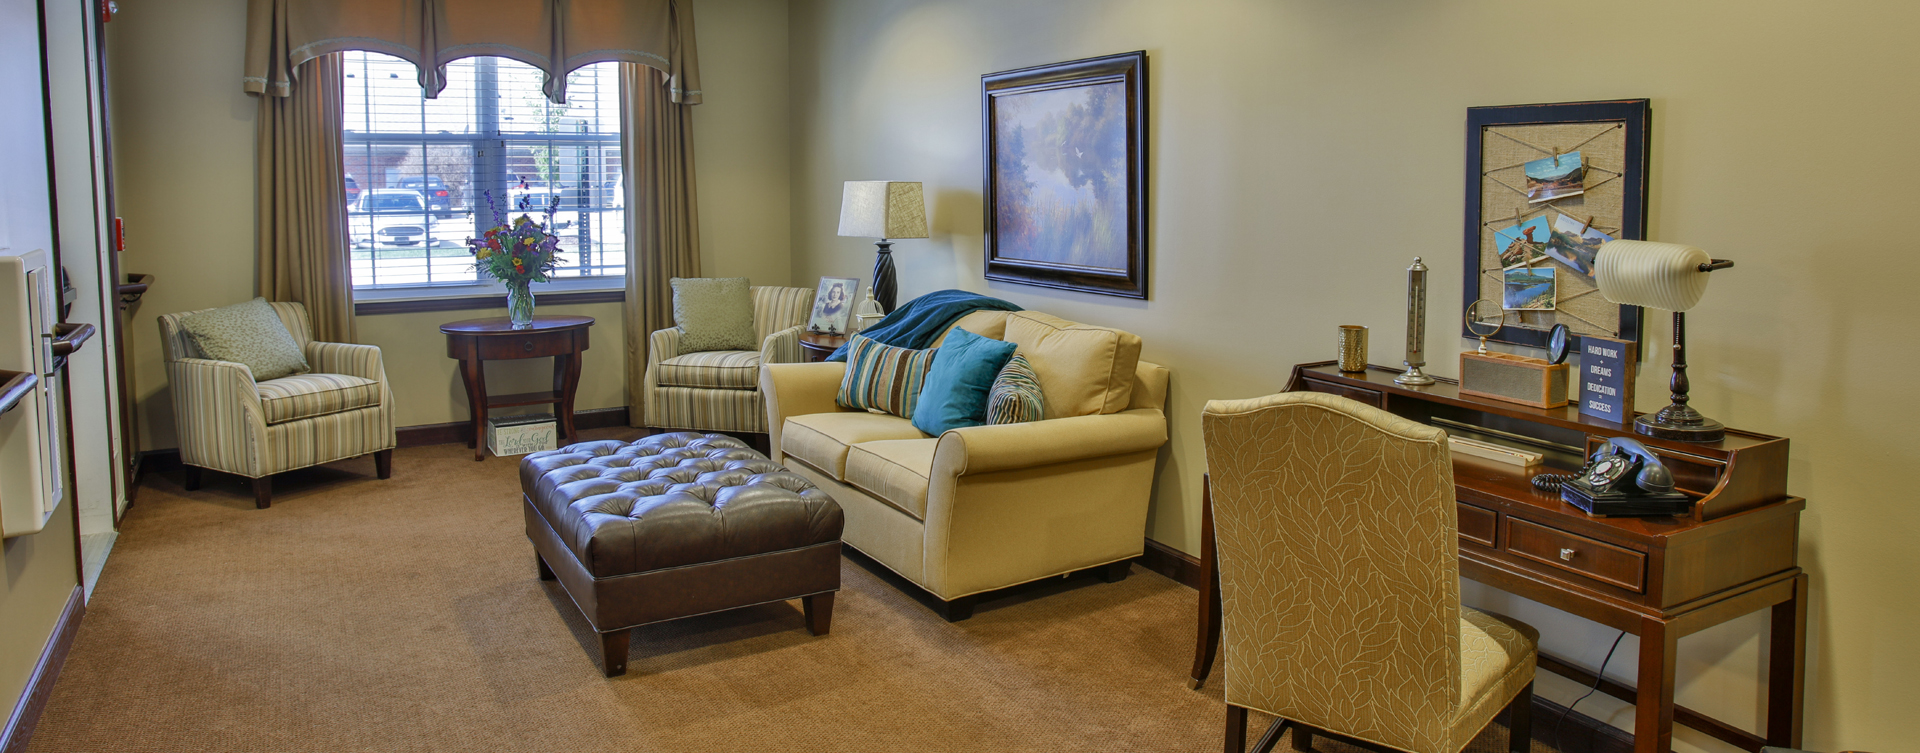 Enjoy a good snooze in the sitting area at Bickford of Bloomington